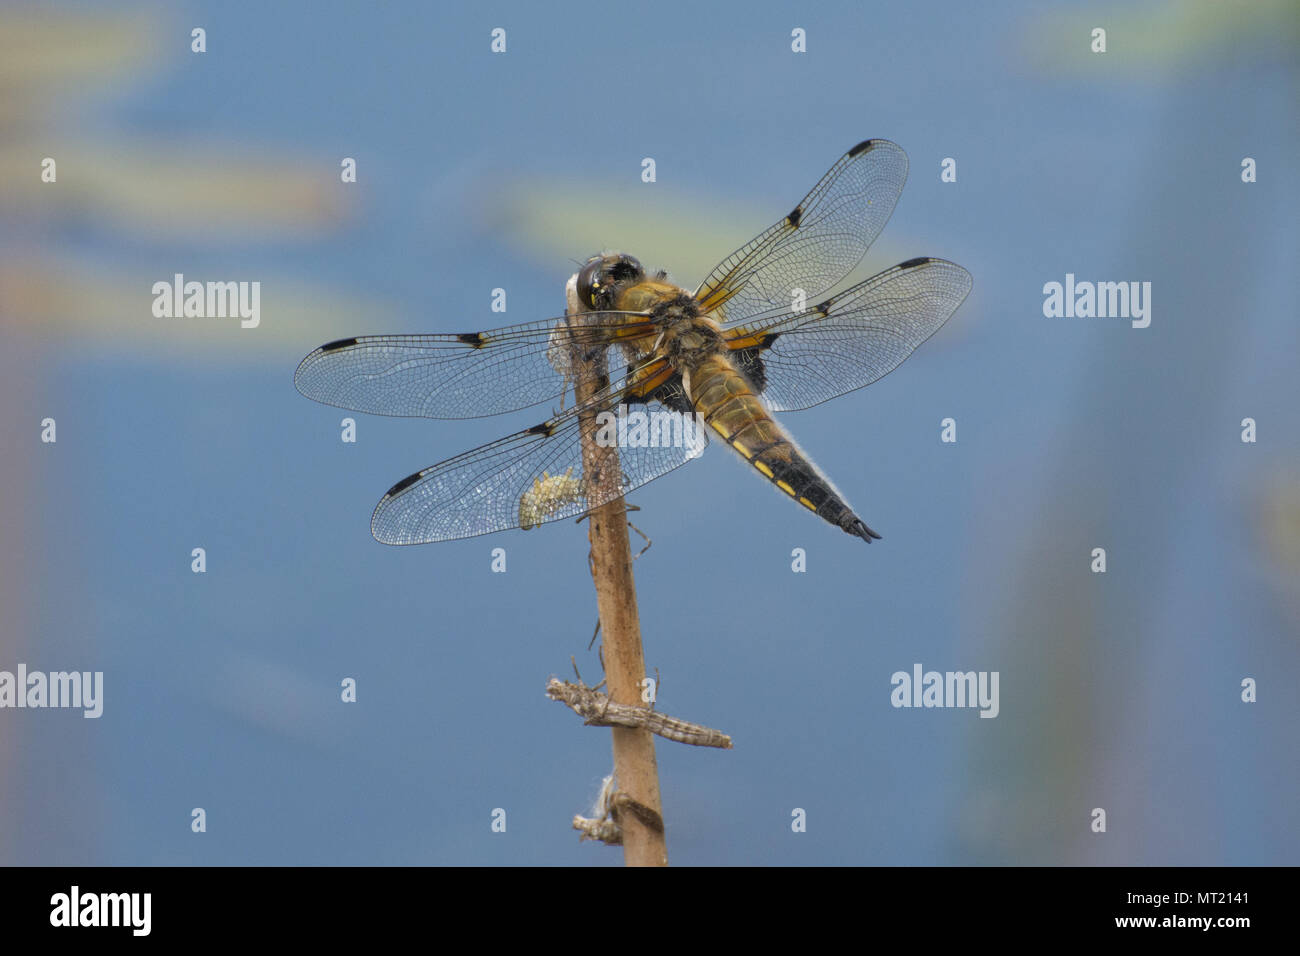 Four-spotted chaser dragonfly (Libellula quadrimaculata) perched over a pond in Hampshire, UK Stock Photo